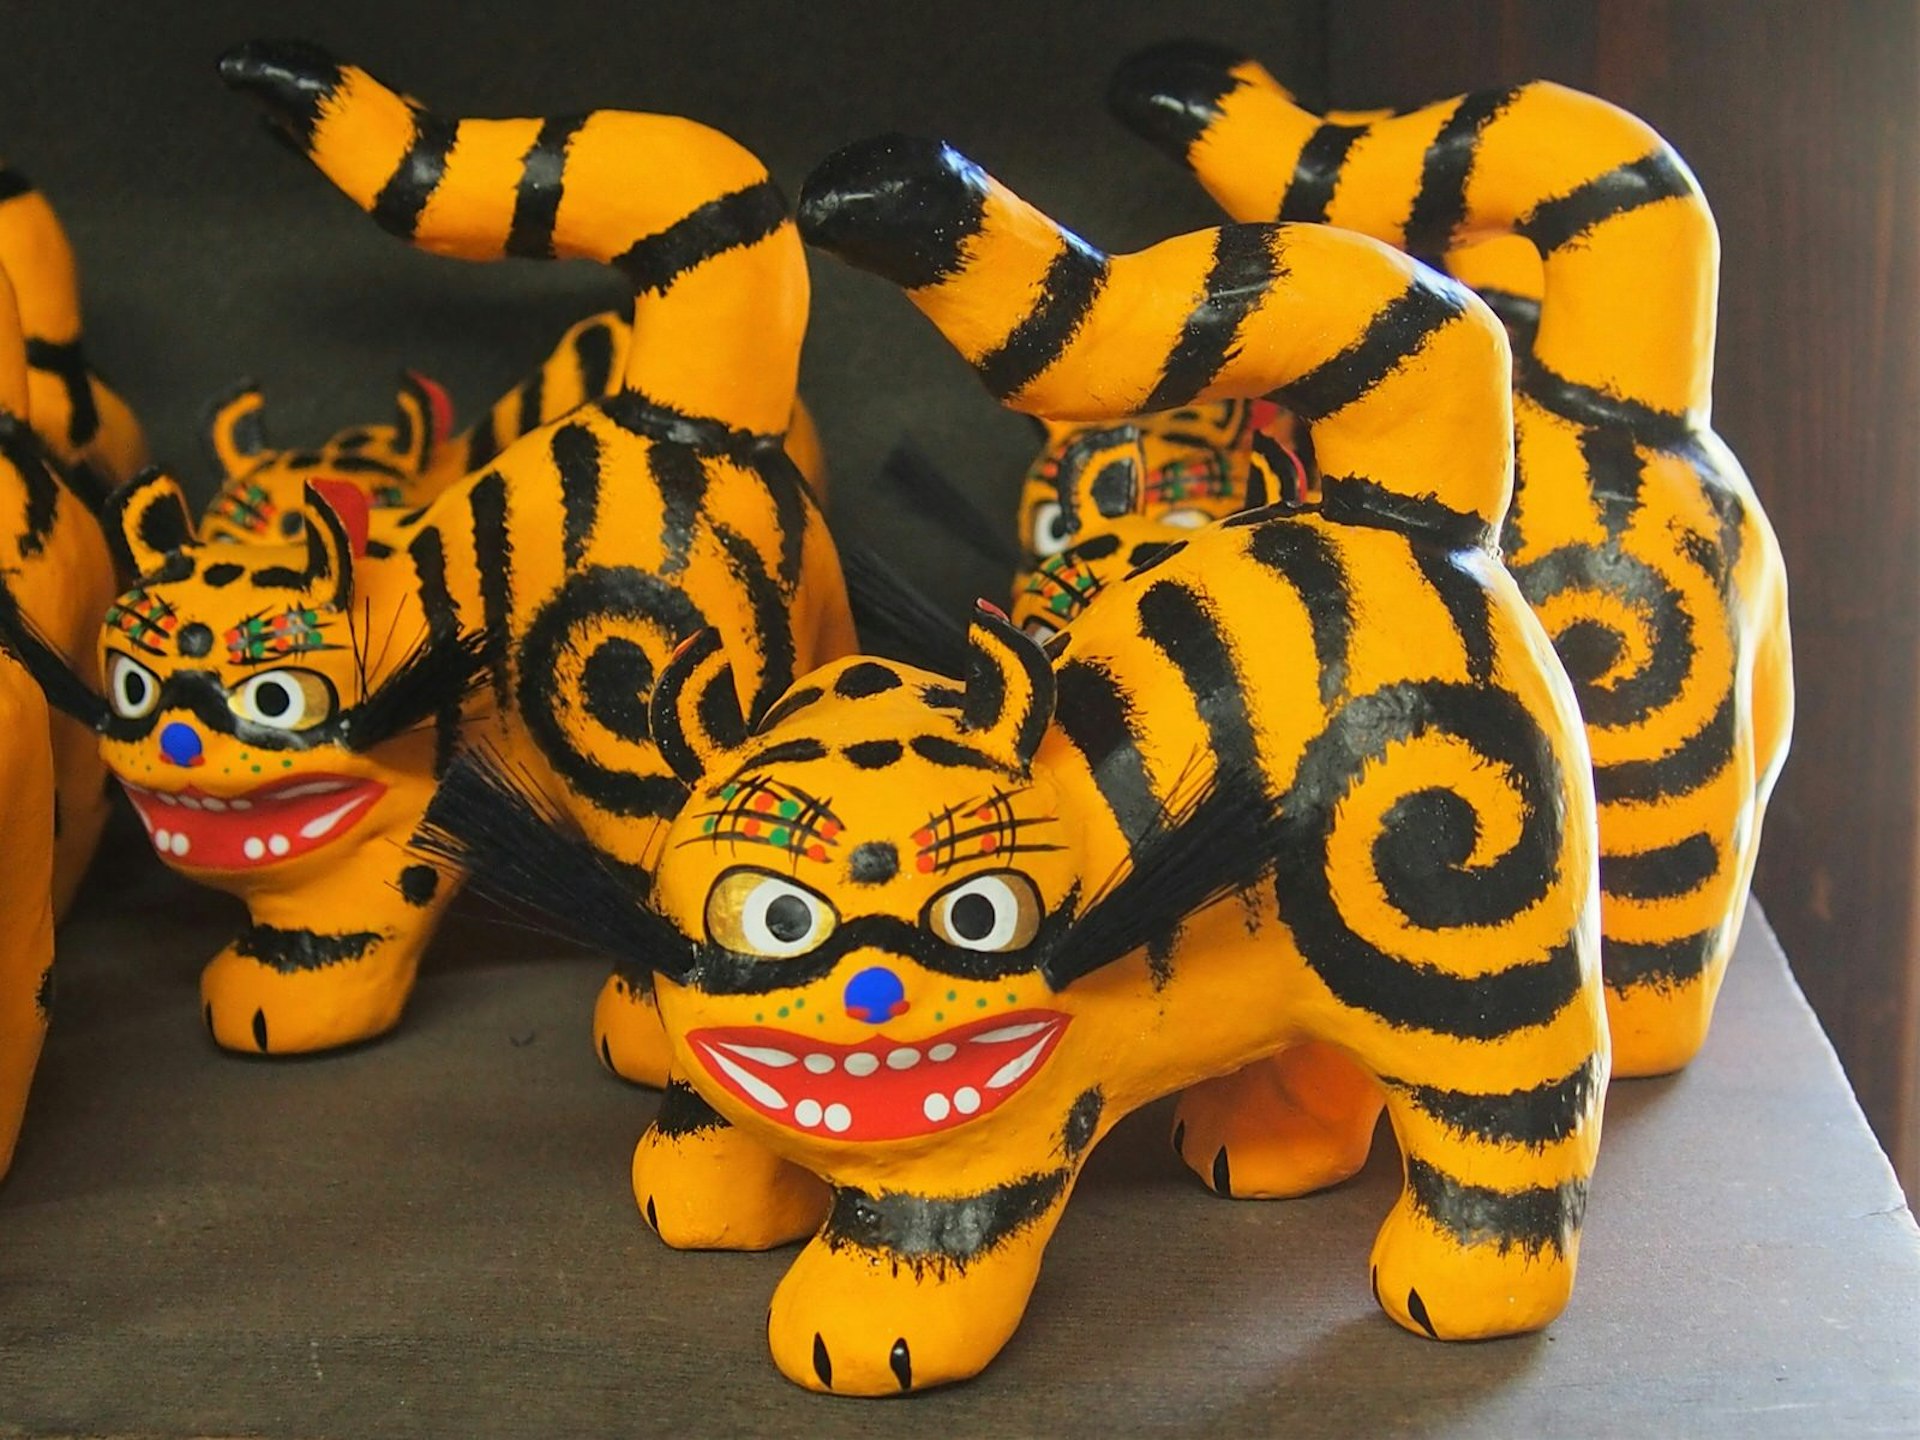 Close up of three papier-mache tigers, brightly painted in orange and black © Manami Okazaki / Lonely Planet